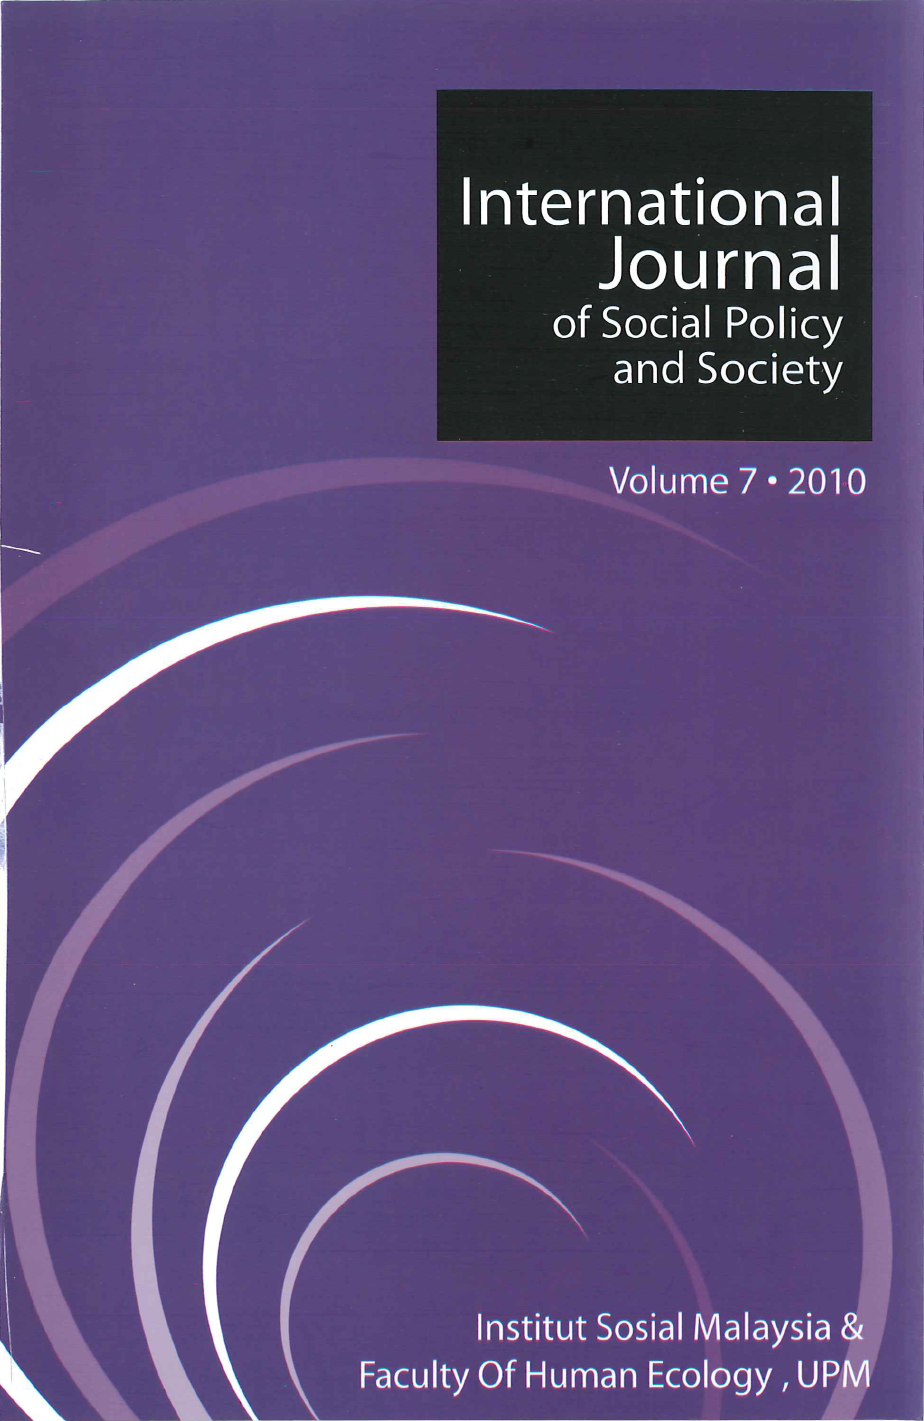 					View Vol. 7 (2010): International Journal of Social Policy and Society Volume 7 2010
				